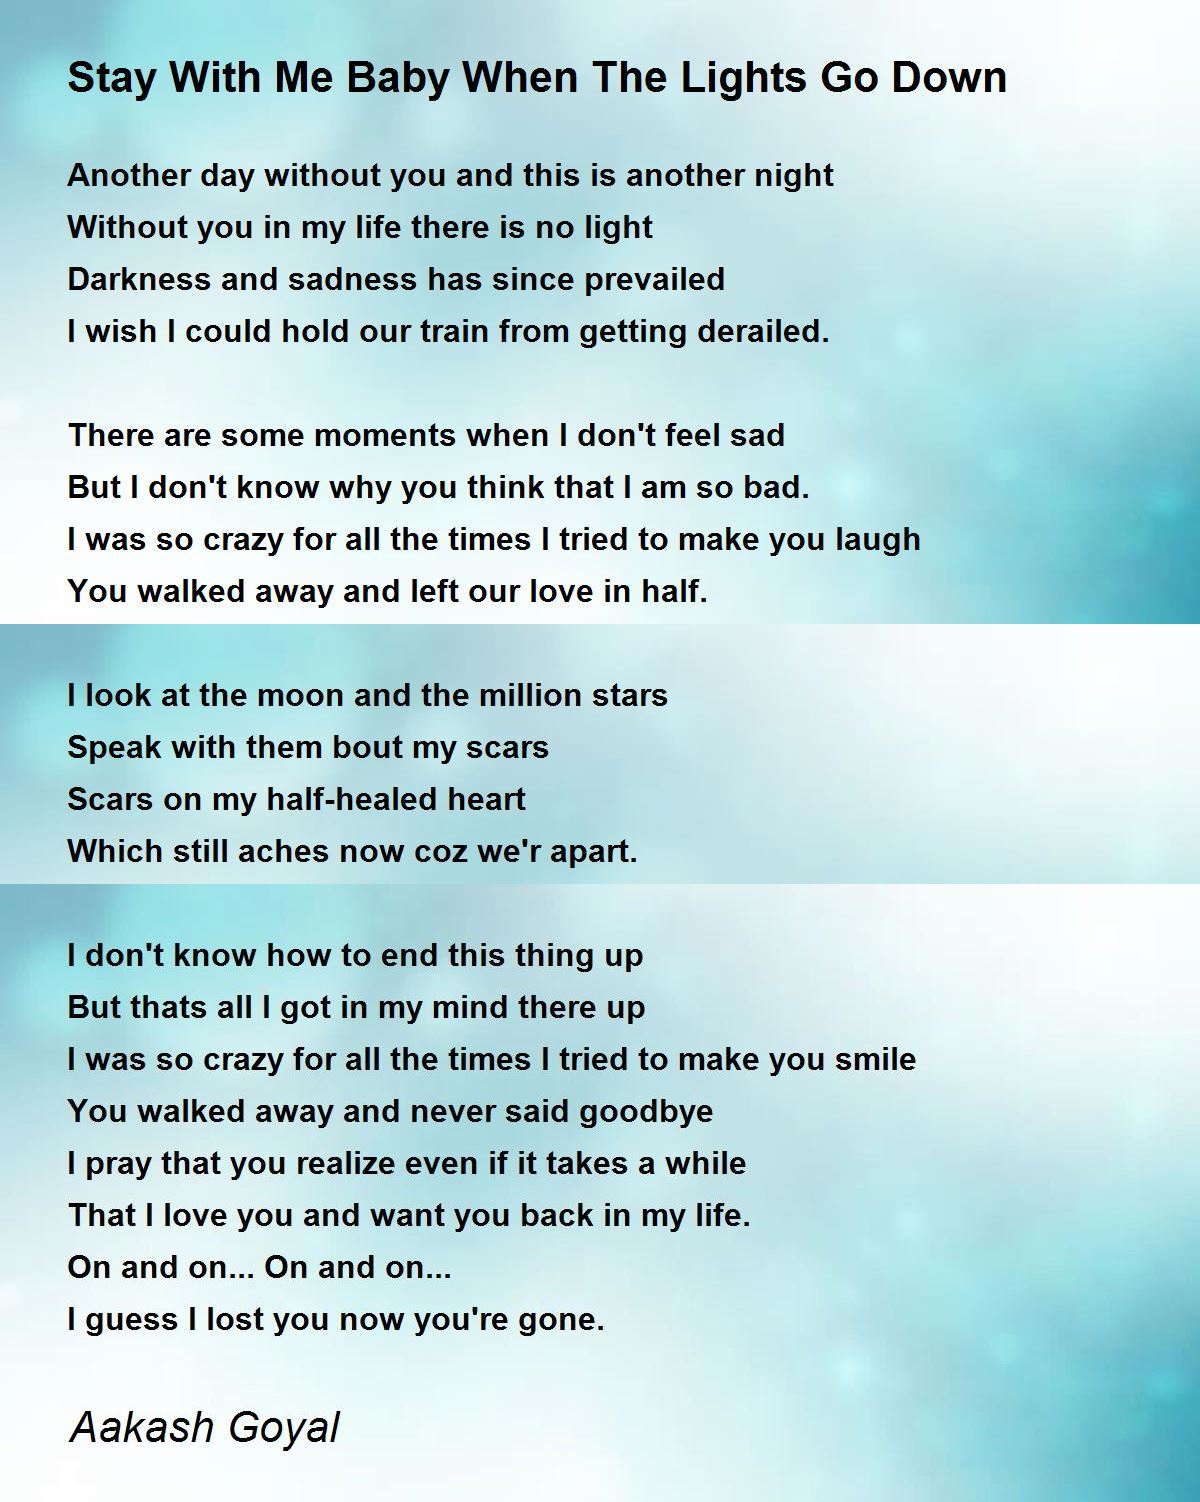 Stay With Me Baby When The Lights Go Down - With Me Baby When The Lights Go Down Poem by Aakash Goyal